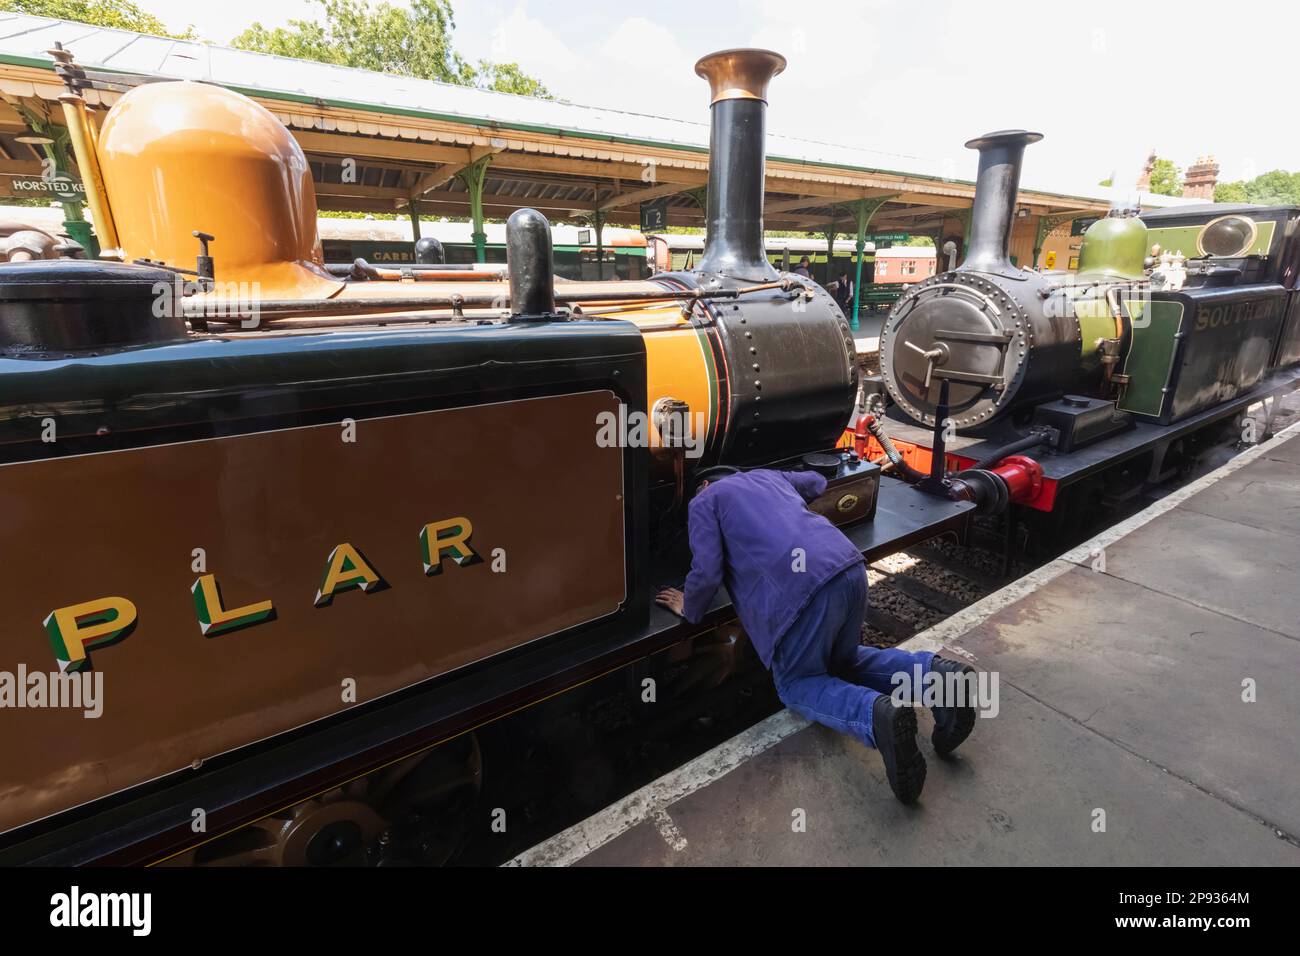 England, Sussex, Bluebell Railway, Horsted Keynes Station, Steam Train Stock Photo